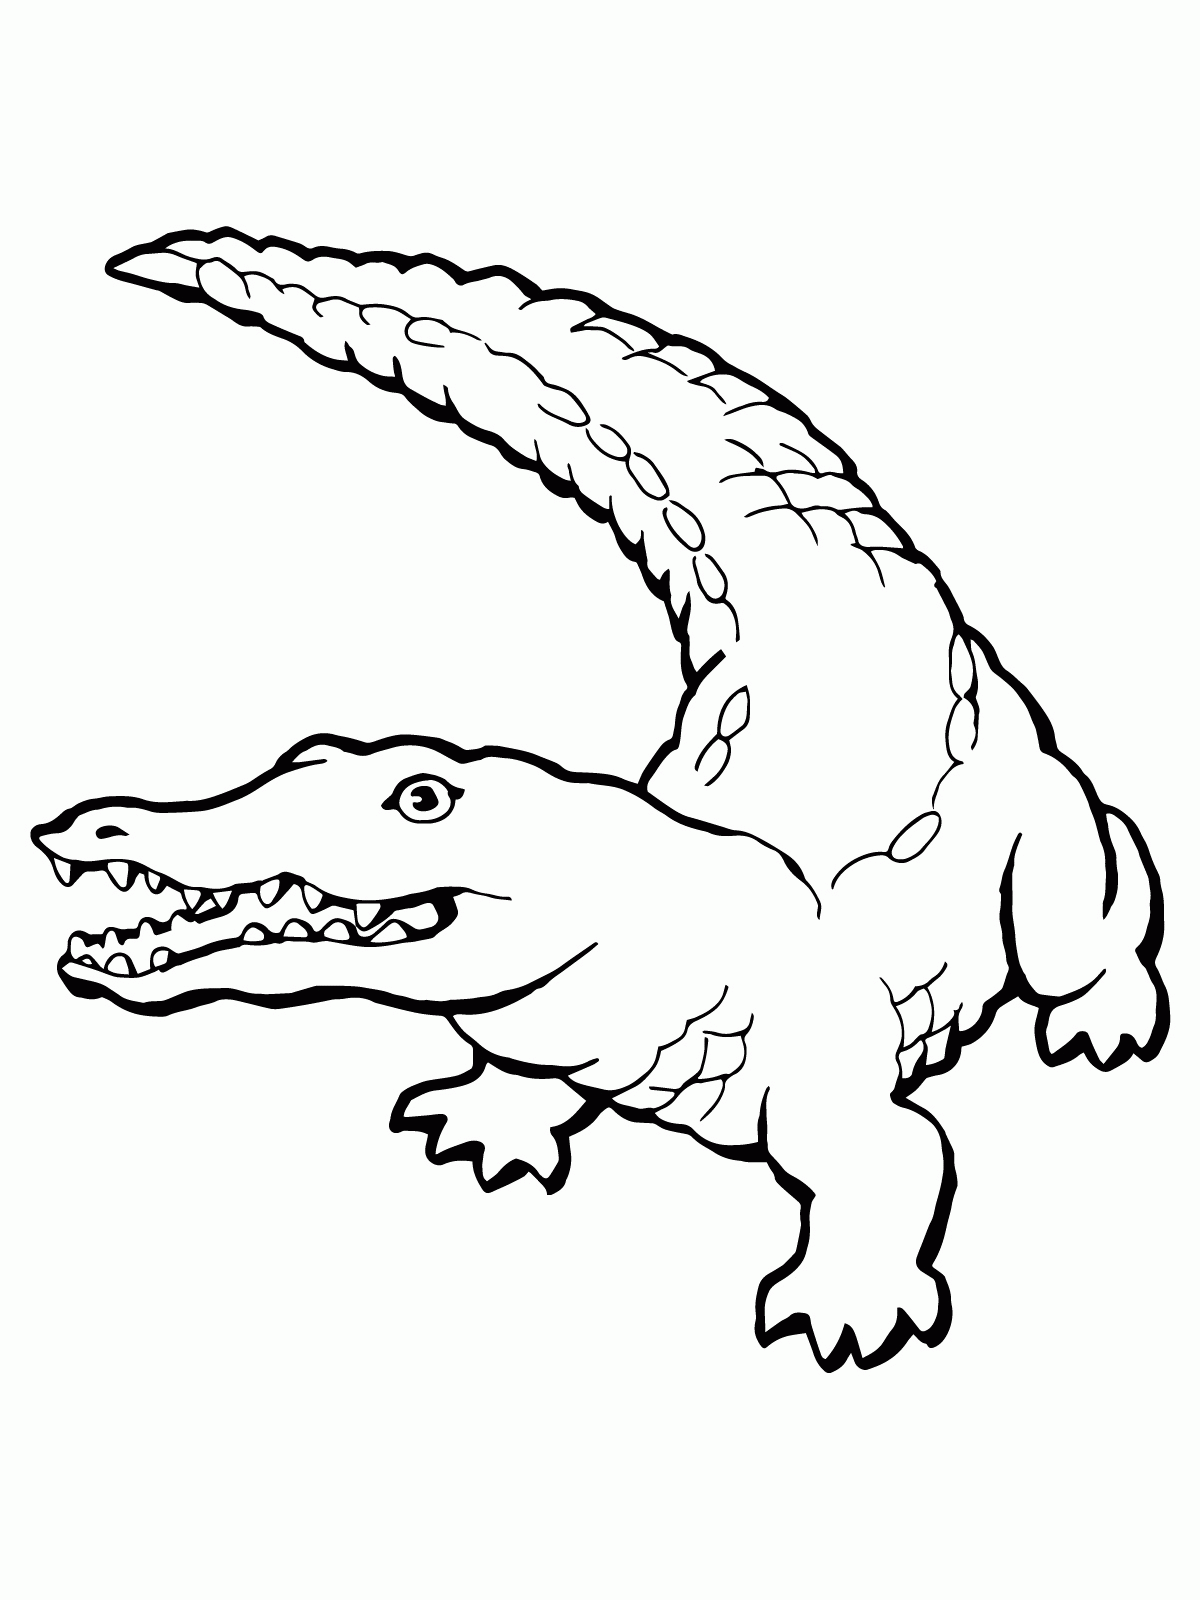 Crocodile Drawings For Kids Coloring Page